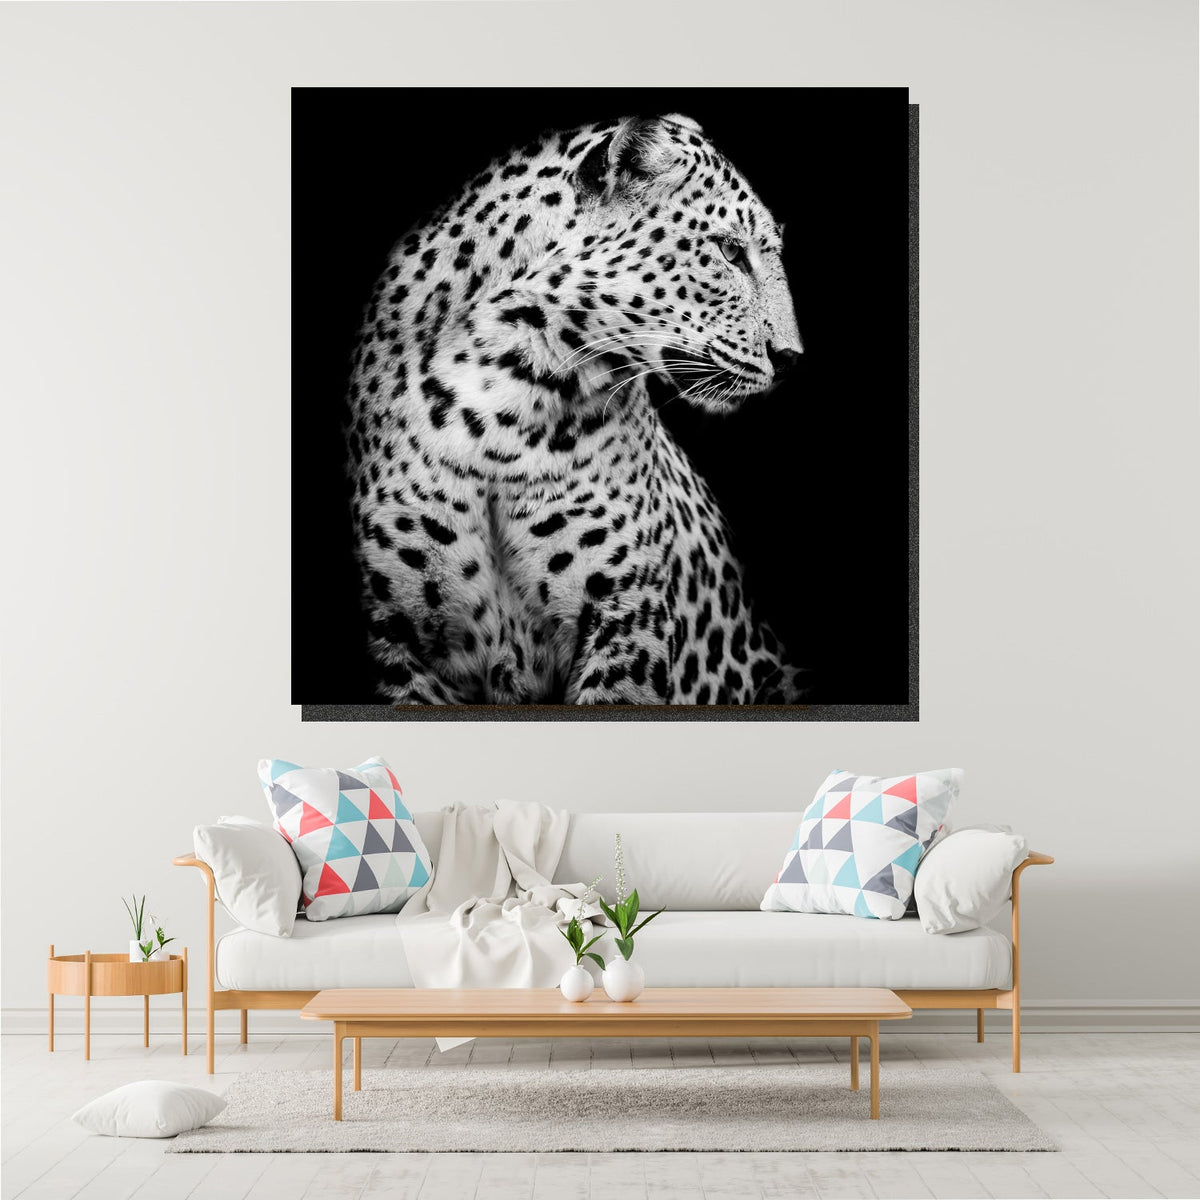 https://cdn.shopify.com/s/files/1/0387/9986/8044/products/LeopardSideViewCanvasArtprintStretched-1.jpg